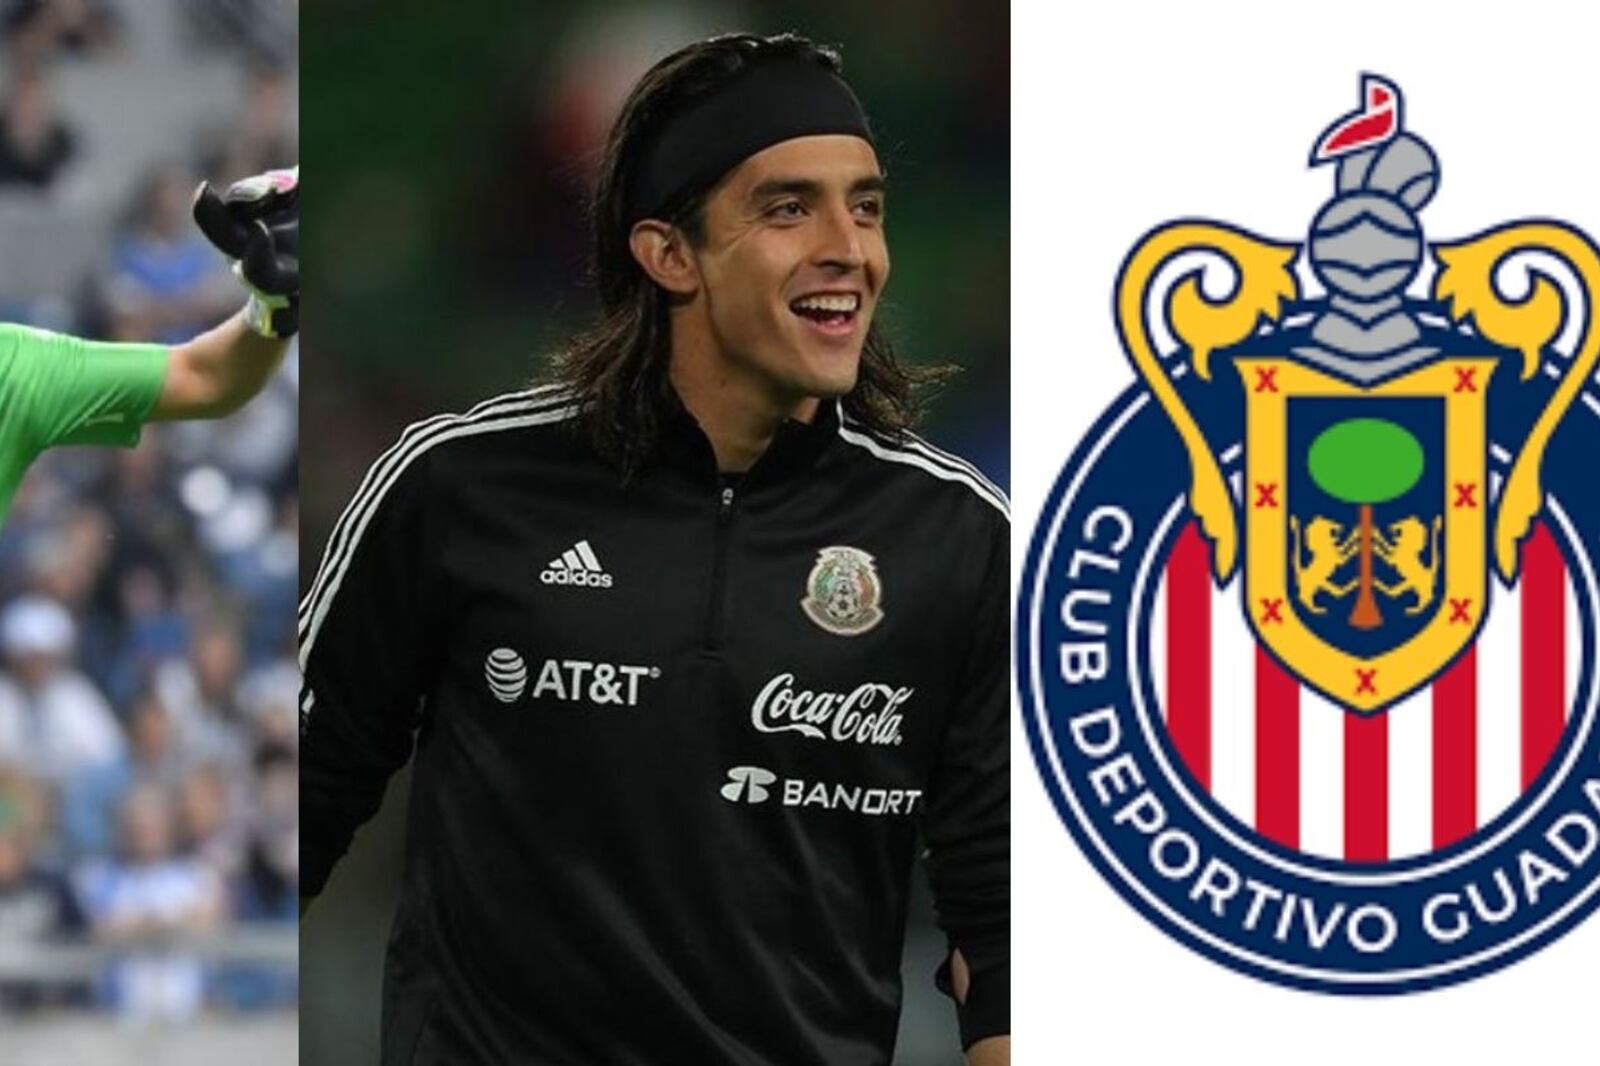 Chivas' decision to replace Jimenez with Acevedo after starring against Atlas